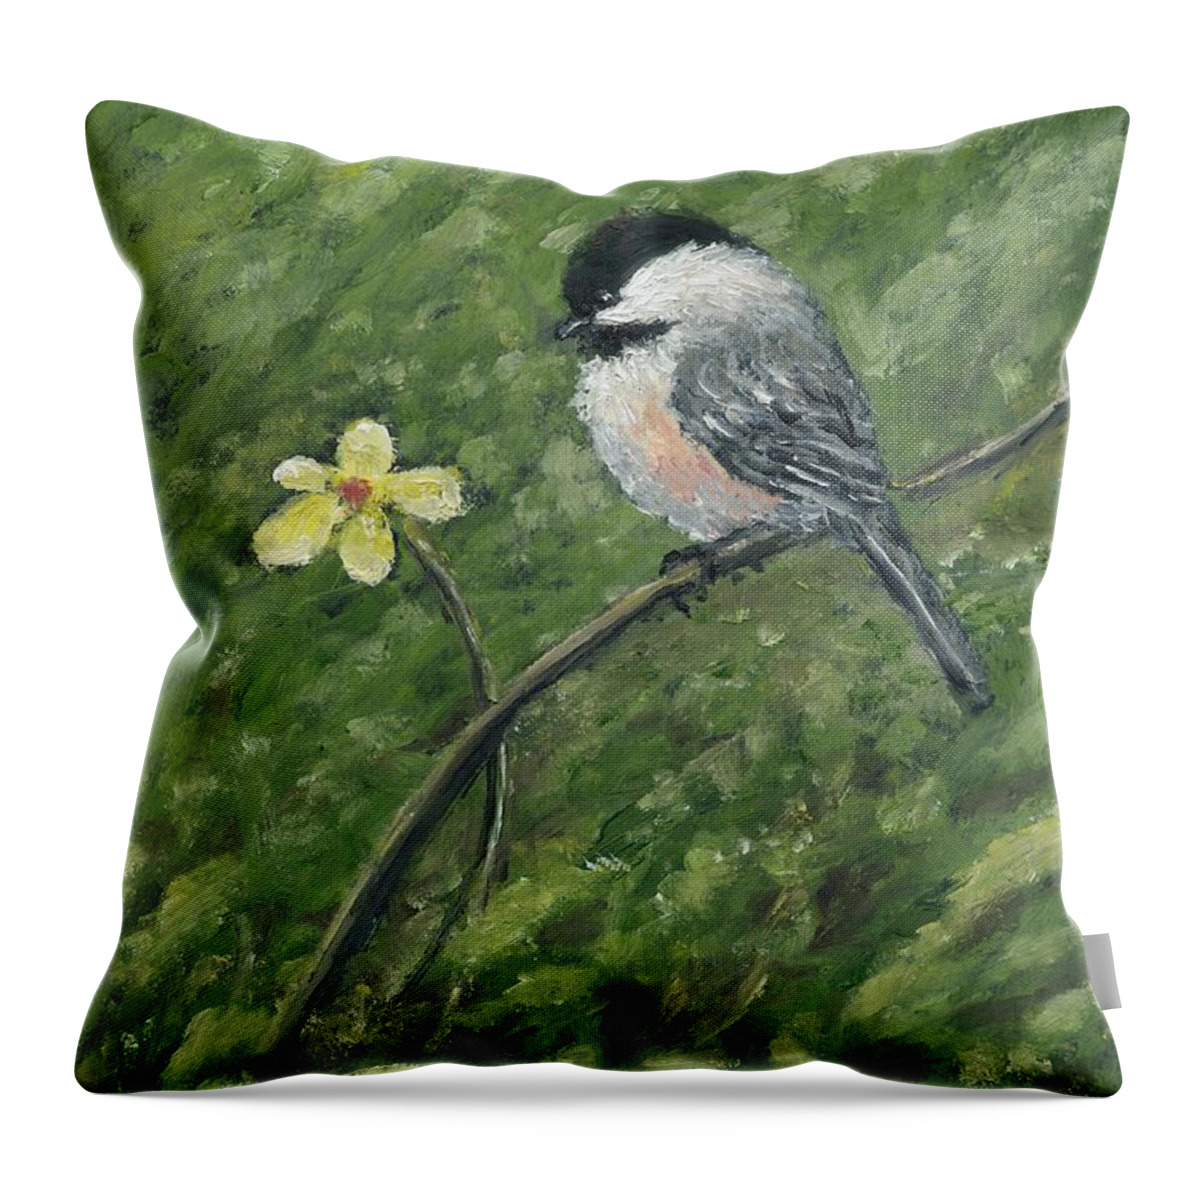 Chickadee Throw Pillow featuring the painting Chickadee and Yellow Flower by Kathleen McDermott